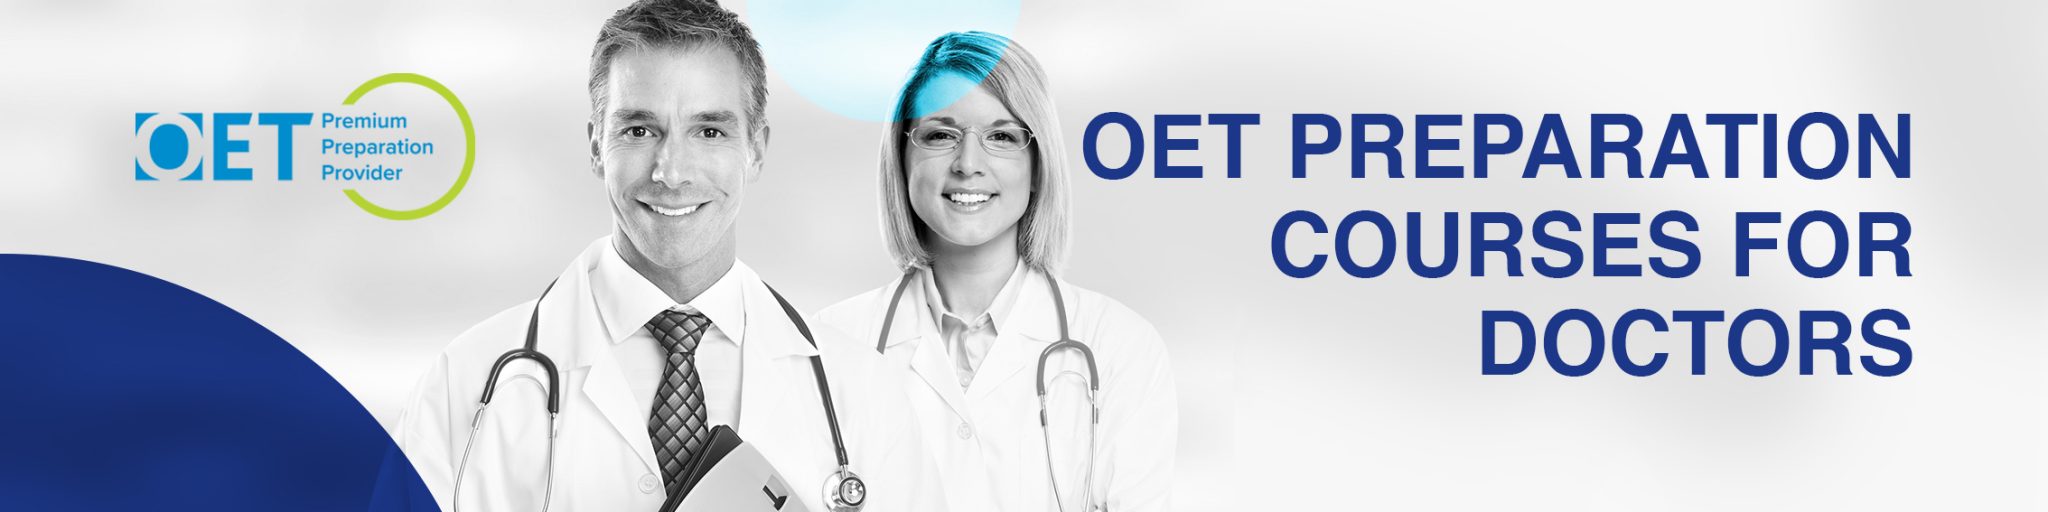 OET Preparation Courses for Doctors